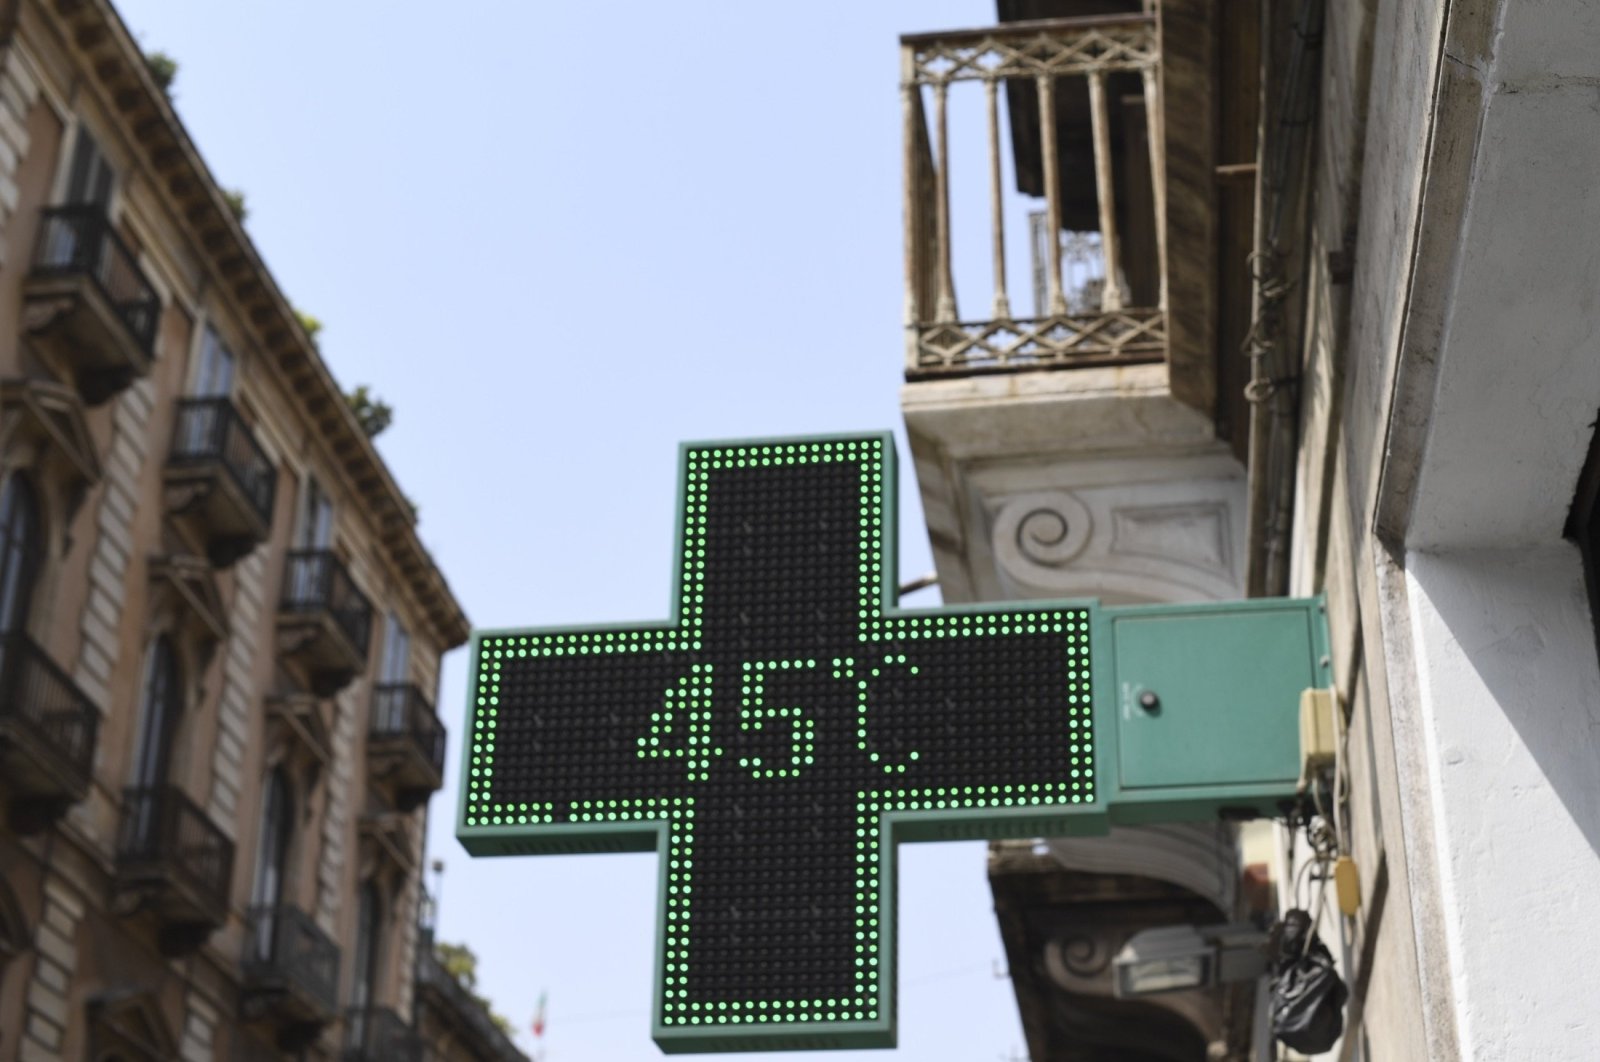 A pharmacy thermometer reports the temperature as 45 degrees Celsius in a street of Catania, Sicily, southern Italy, Aug. 11, 2021. (AP Photo)